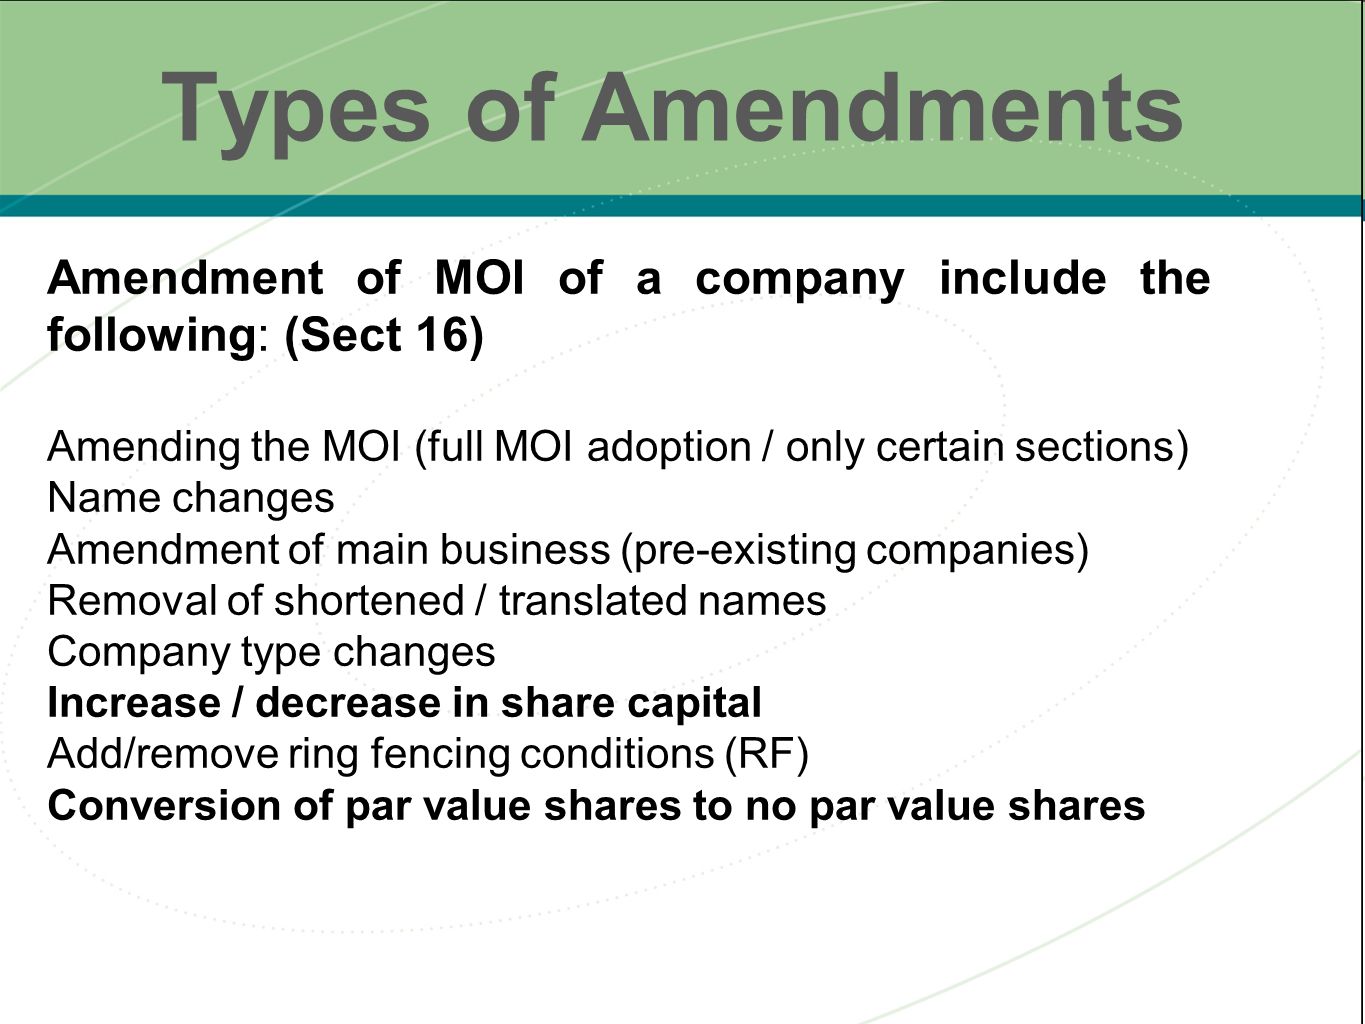 Types of Amendments Amendment of MOI of a company include the following: (Sect 16) Amending the MOI (full MOI adoption / only certain sections) Name changes Amendment of main business (pre-existing companies) Removal of shortened / translated names Company type changes Increase / decrease in share capital Add/remove ring fencing conditions (RF) Conversion of par value shares to no par value shares